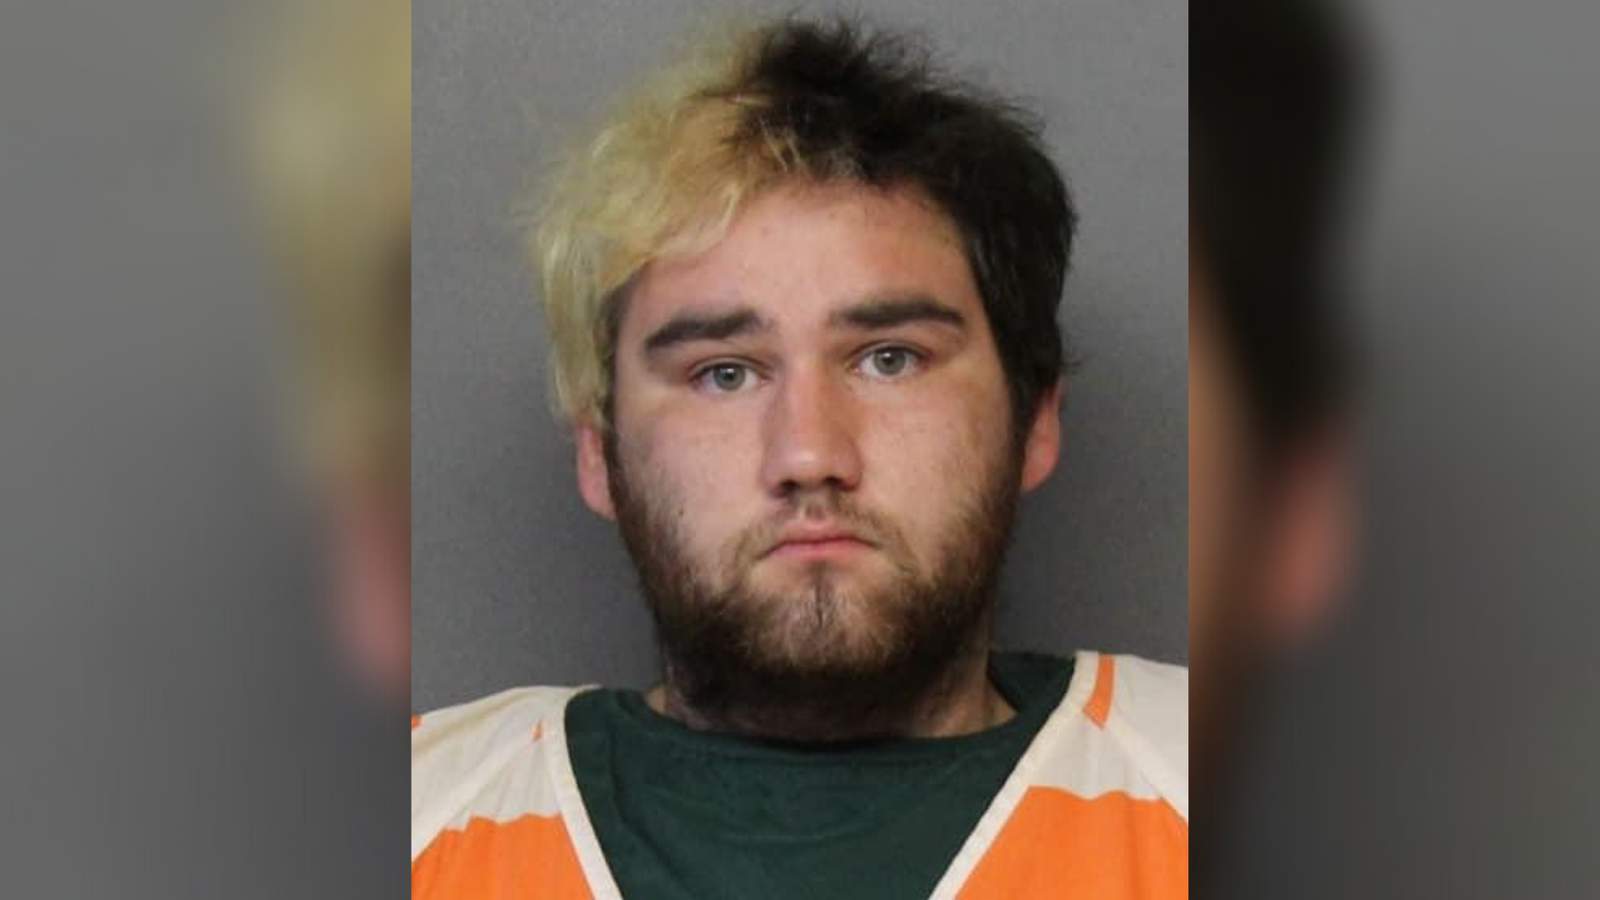 UPDATE: Suspect in custody after 19-year-old fatally shot at Texas Renaissance Festival campgrounds